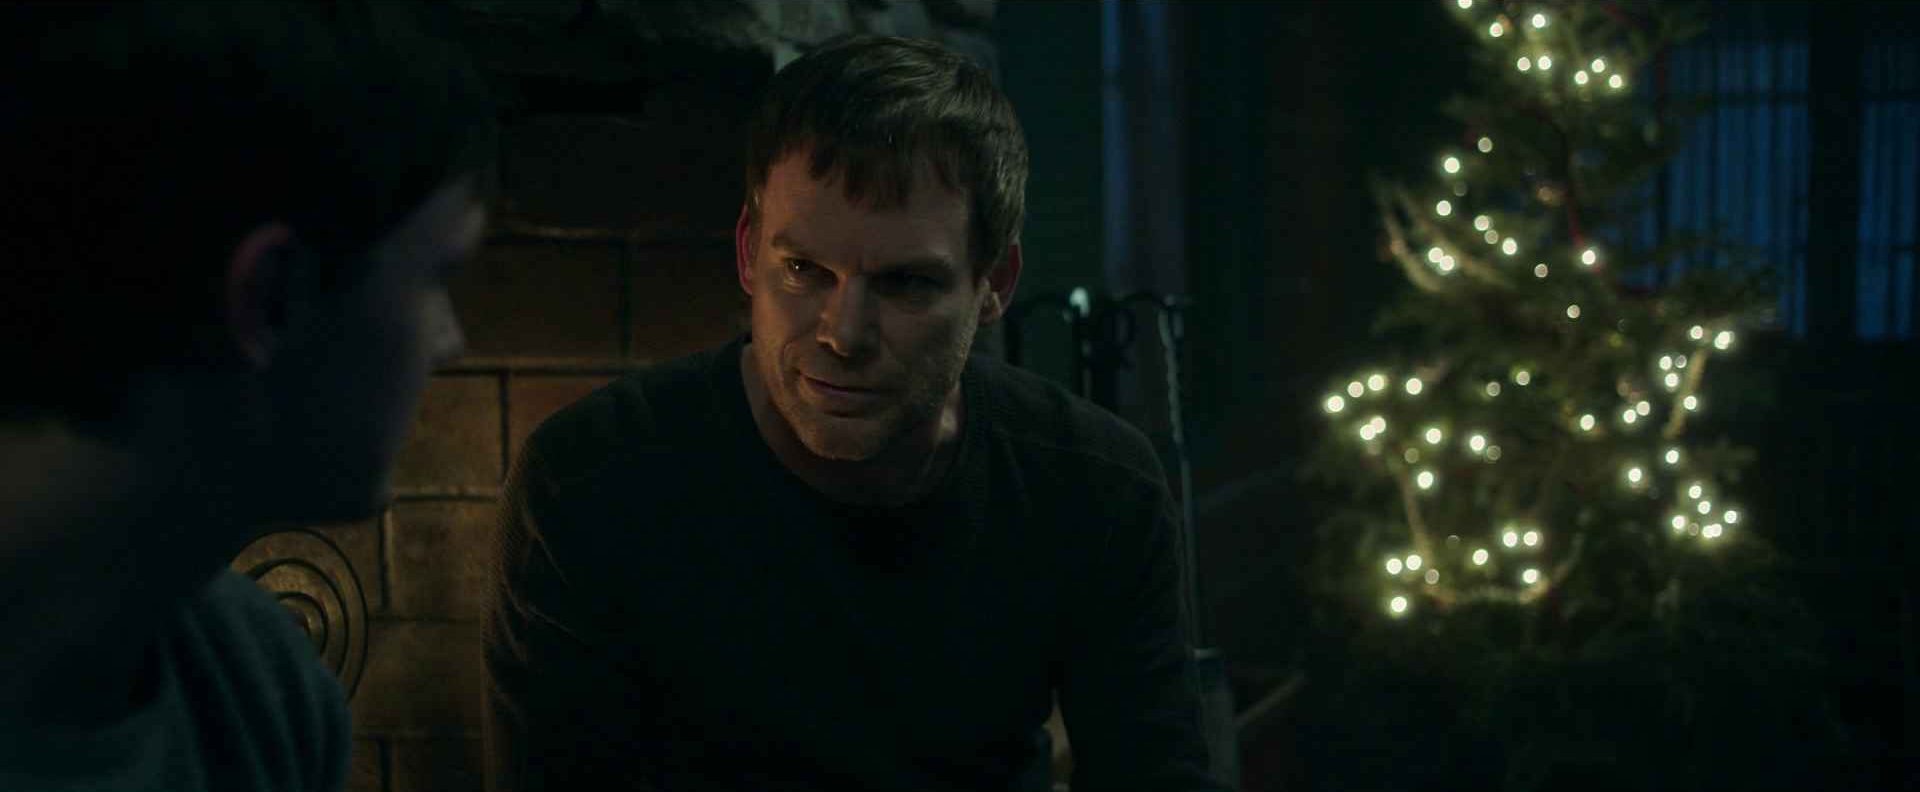 Events From Previous Episode That May Affect Dexter New Blood Season 1 Episode 10